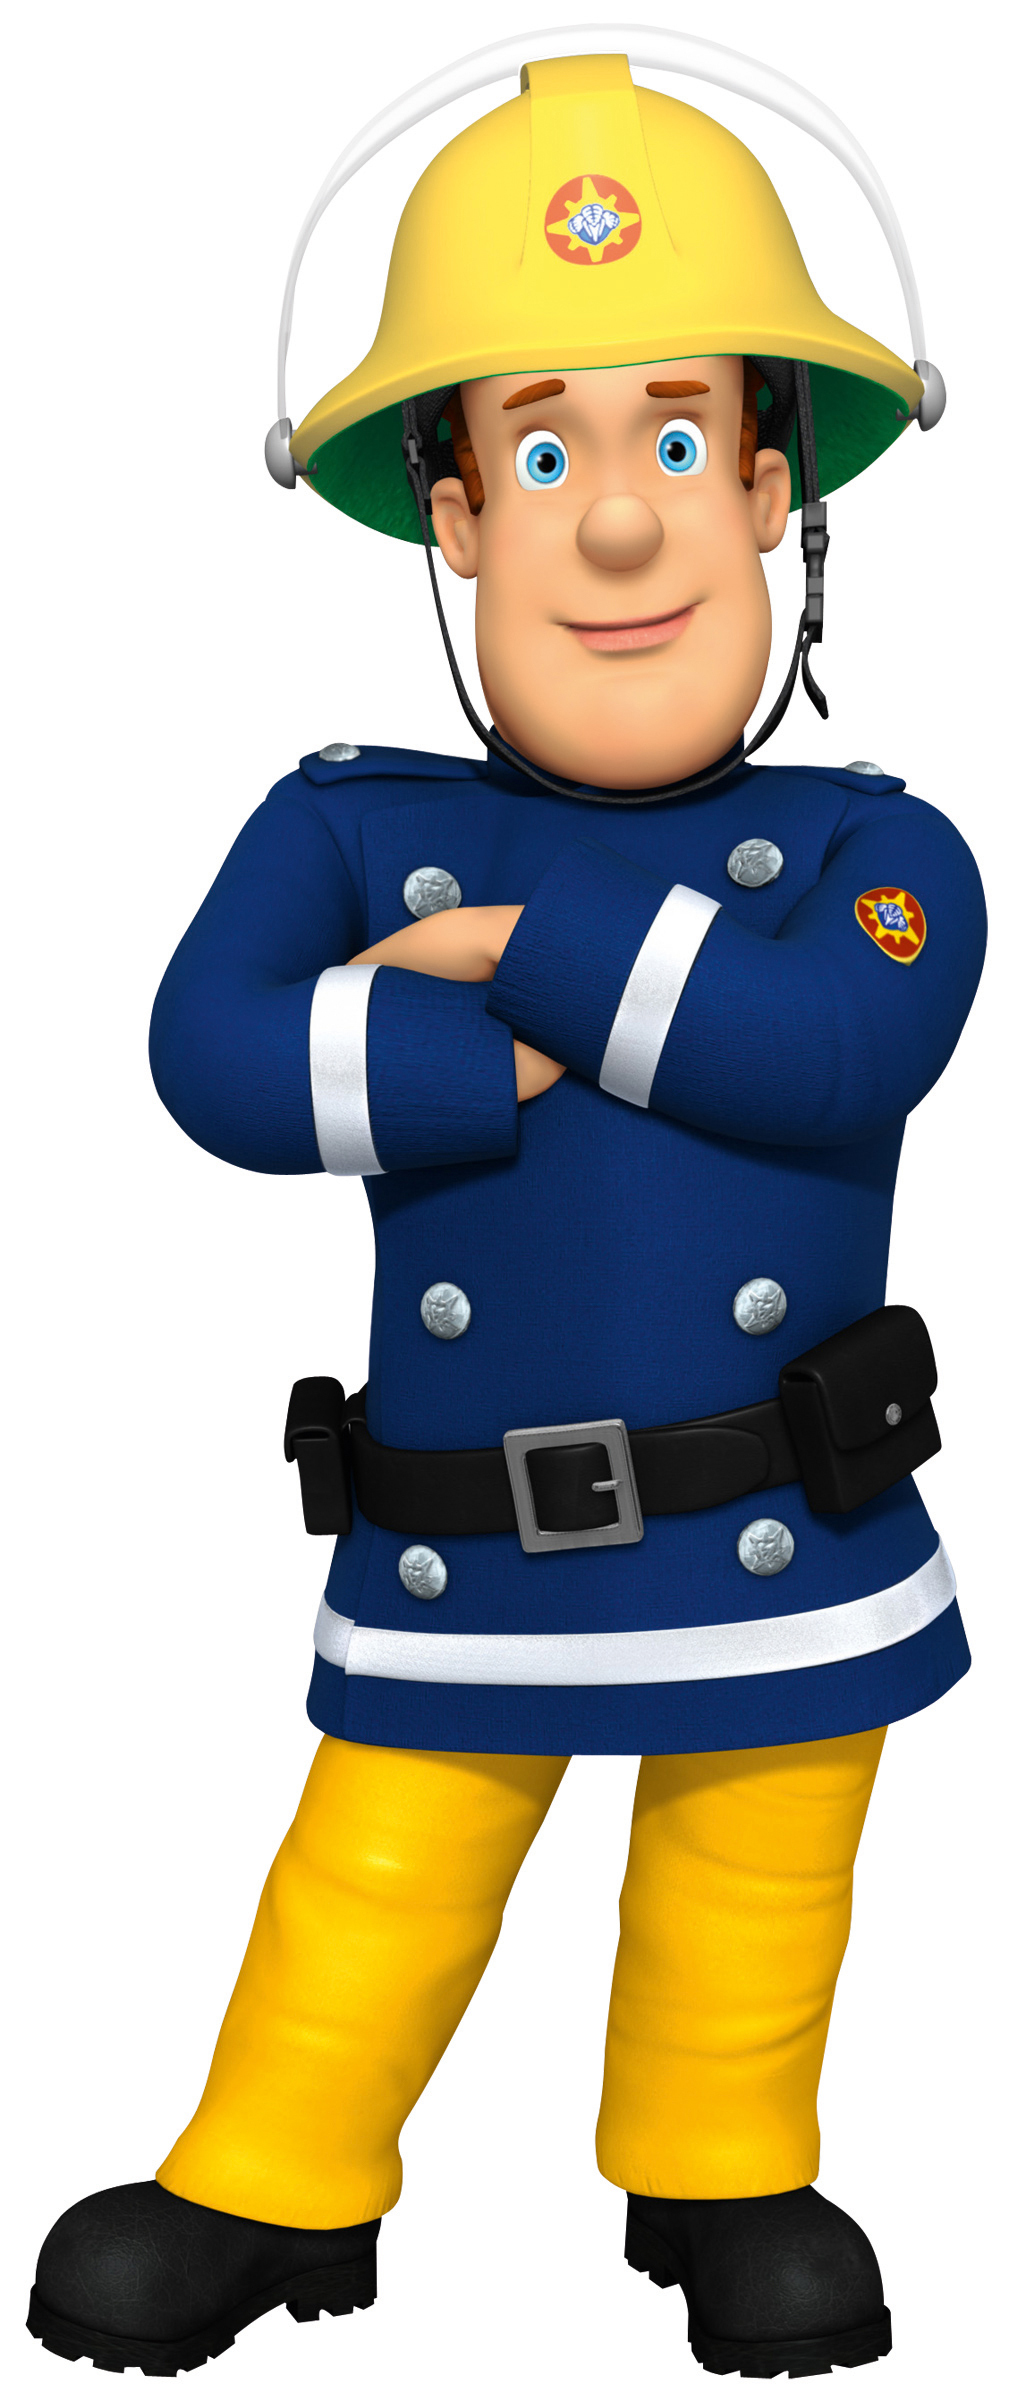 Hit Entertainment Brings Fireman Sam® Franchise To Amazon.Com Exclusively |  Business Wire